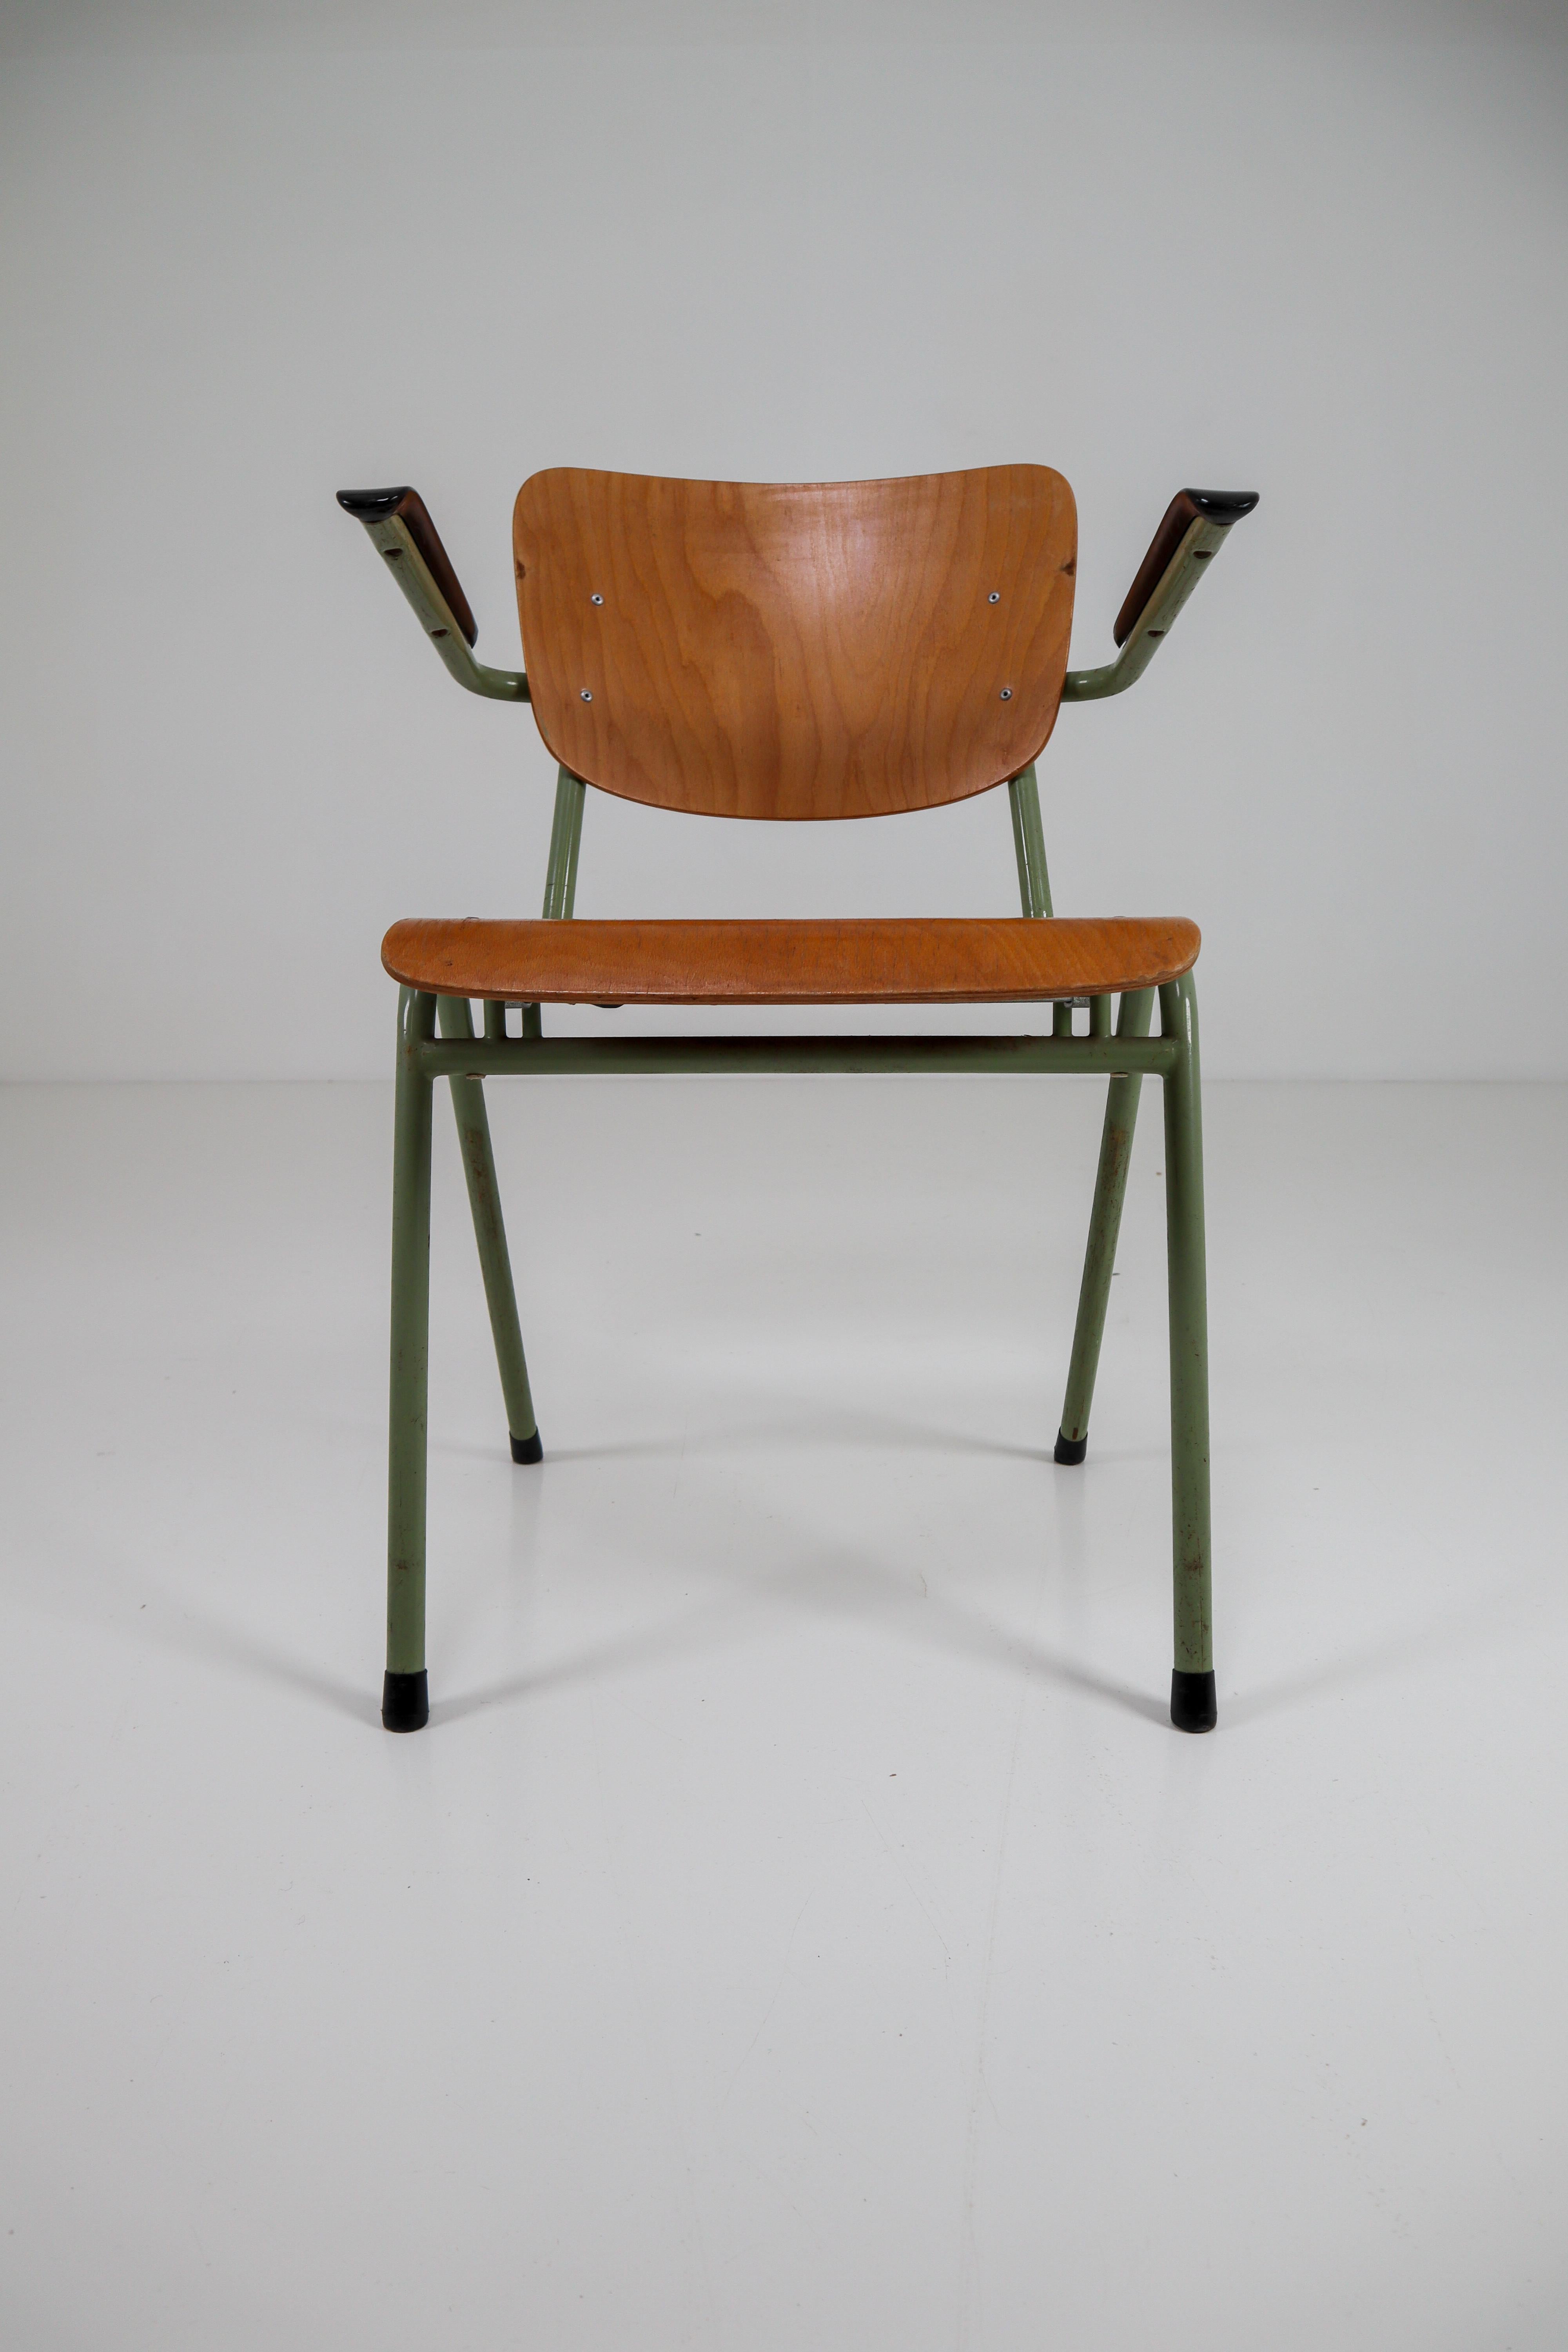 100 Green Patinated Dutch Design Industrial Plywood Armchairs, 1960s (Industriell)